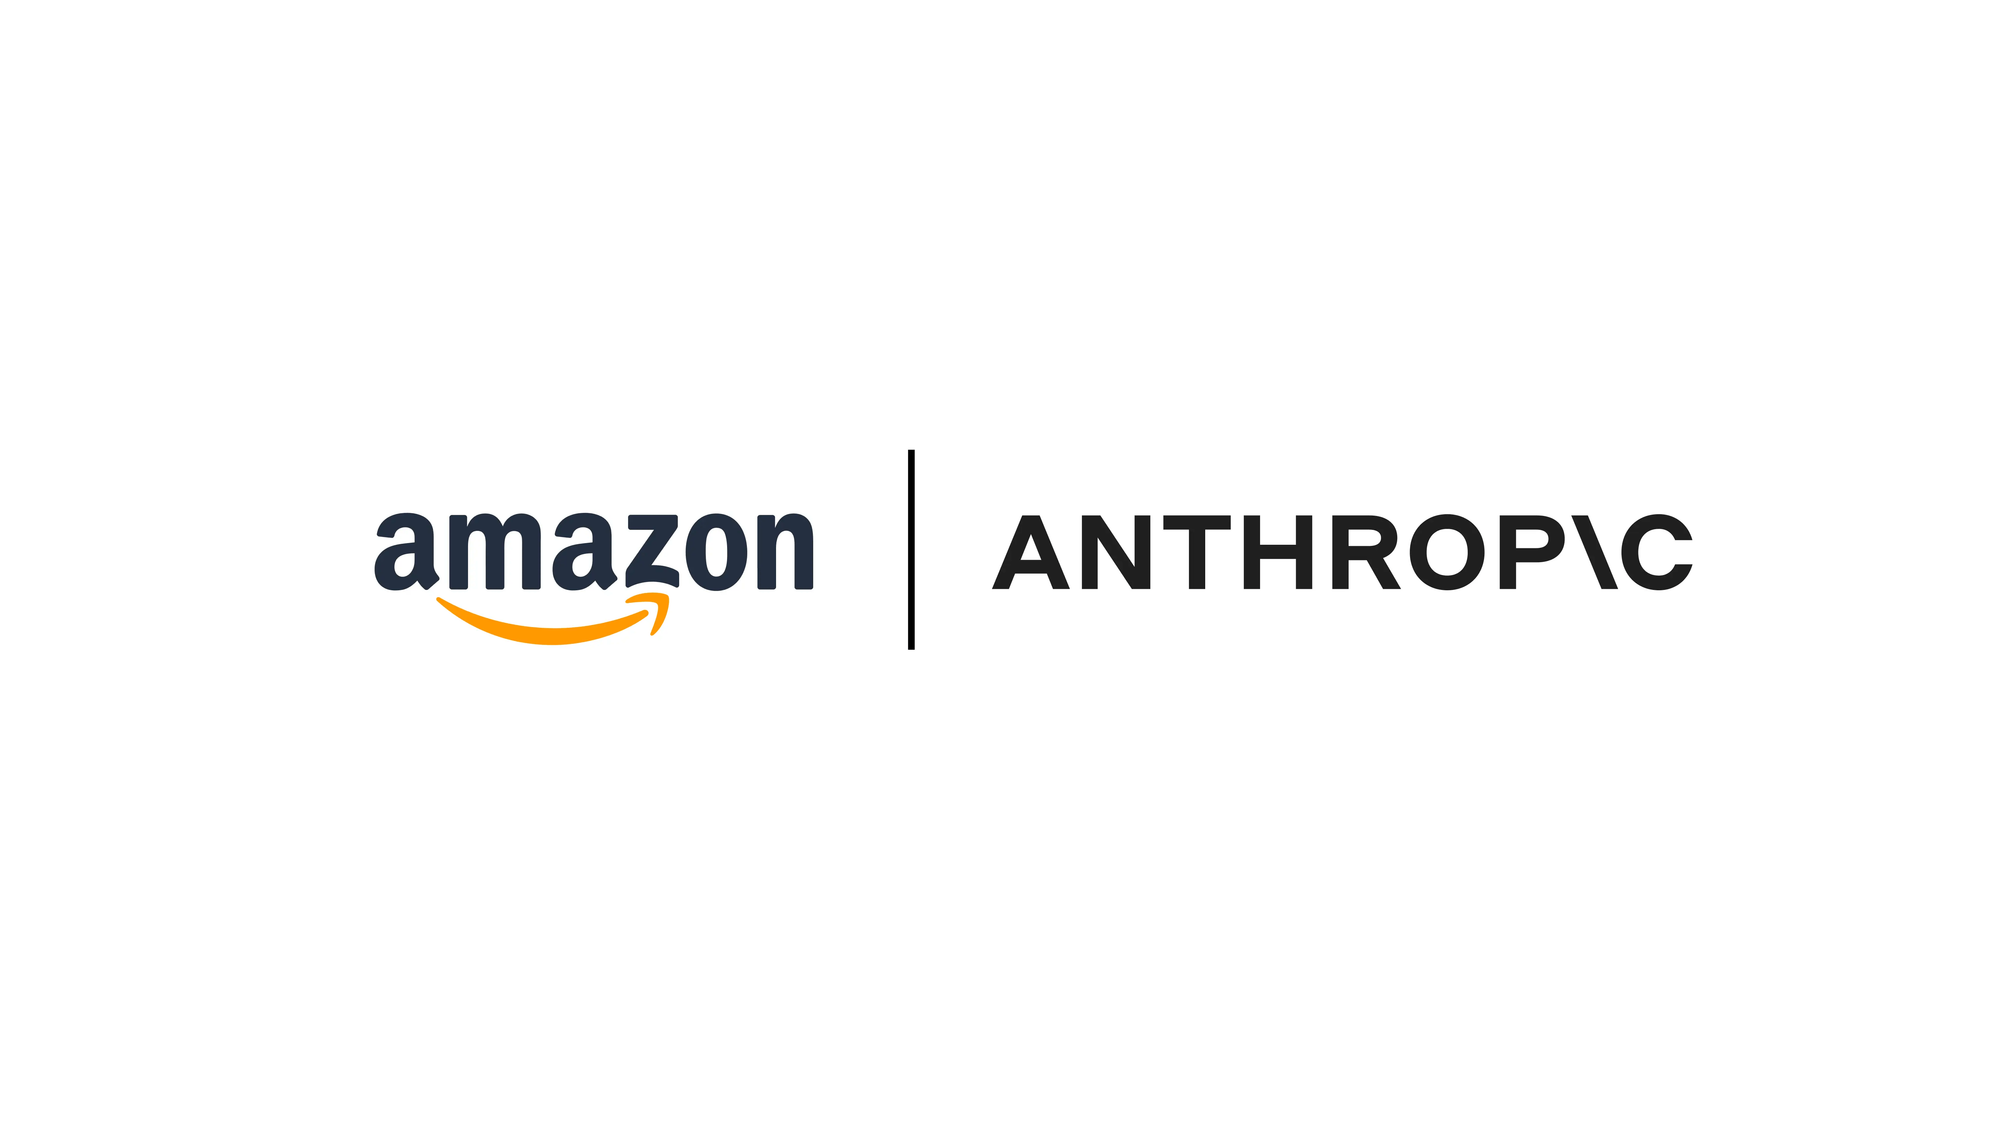 Anthropic could receive up to $4 billion from Amazon as part of ongoing collaboration